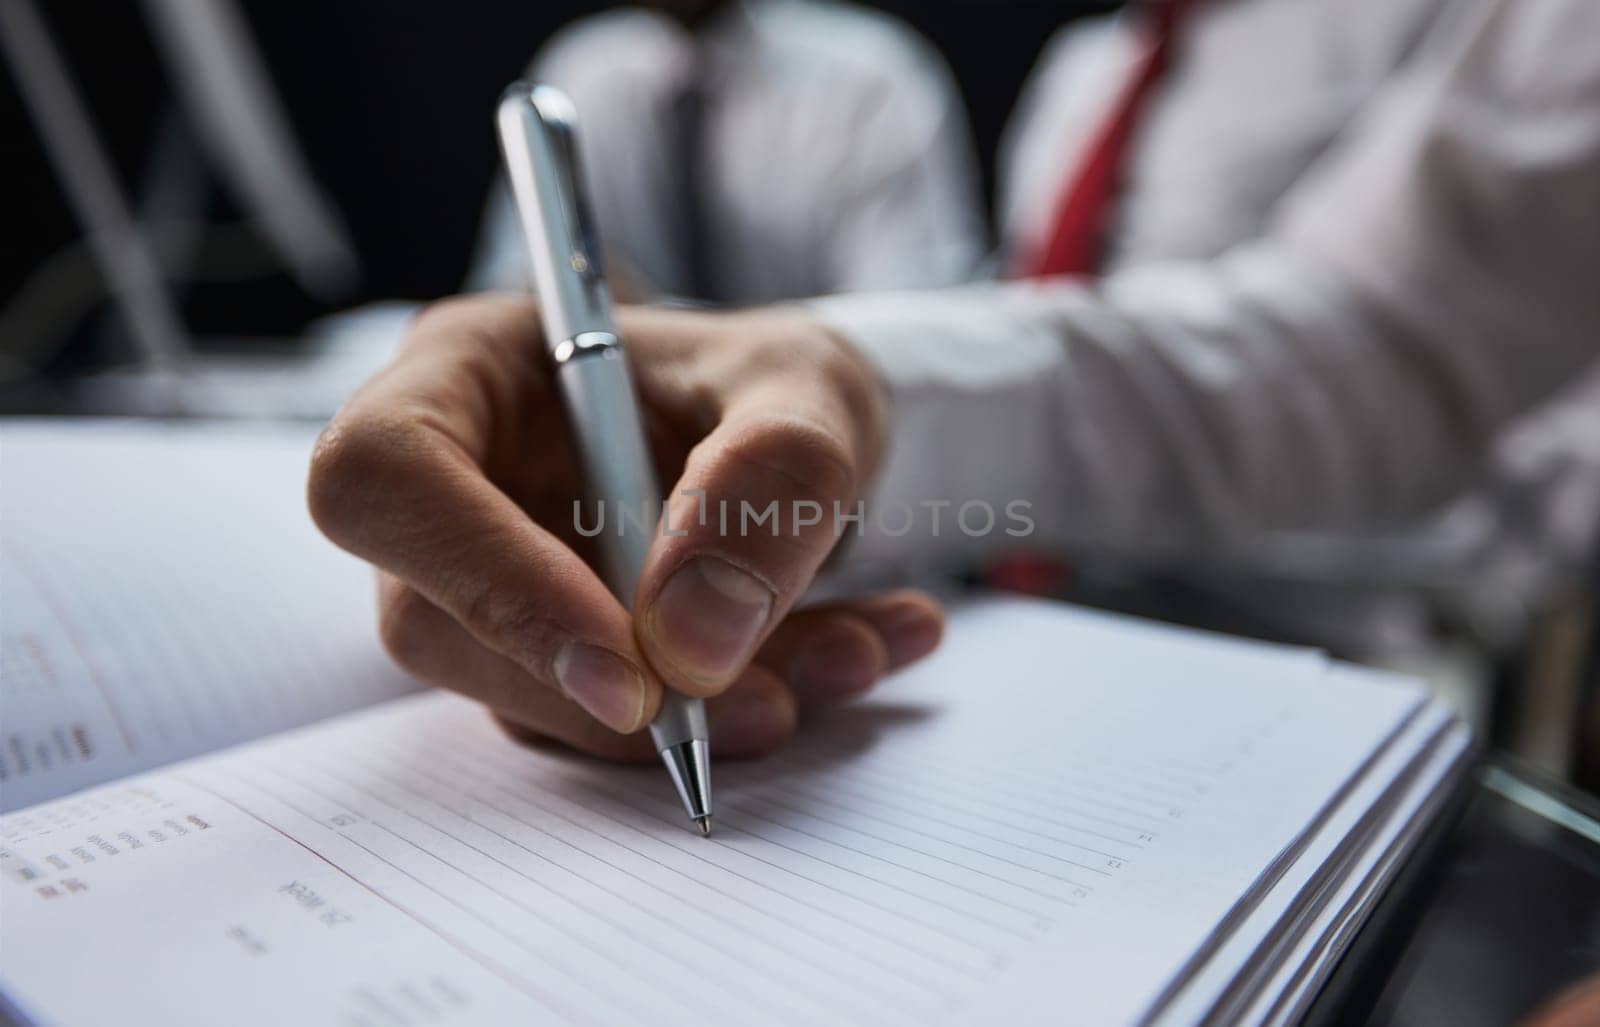 Businessman hand writing note on a notebook close-up. Business man working at office desk.